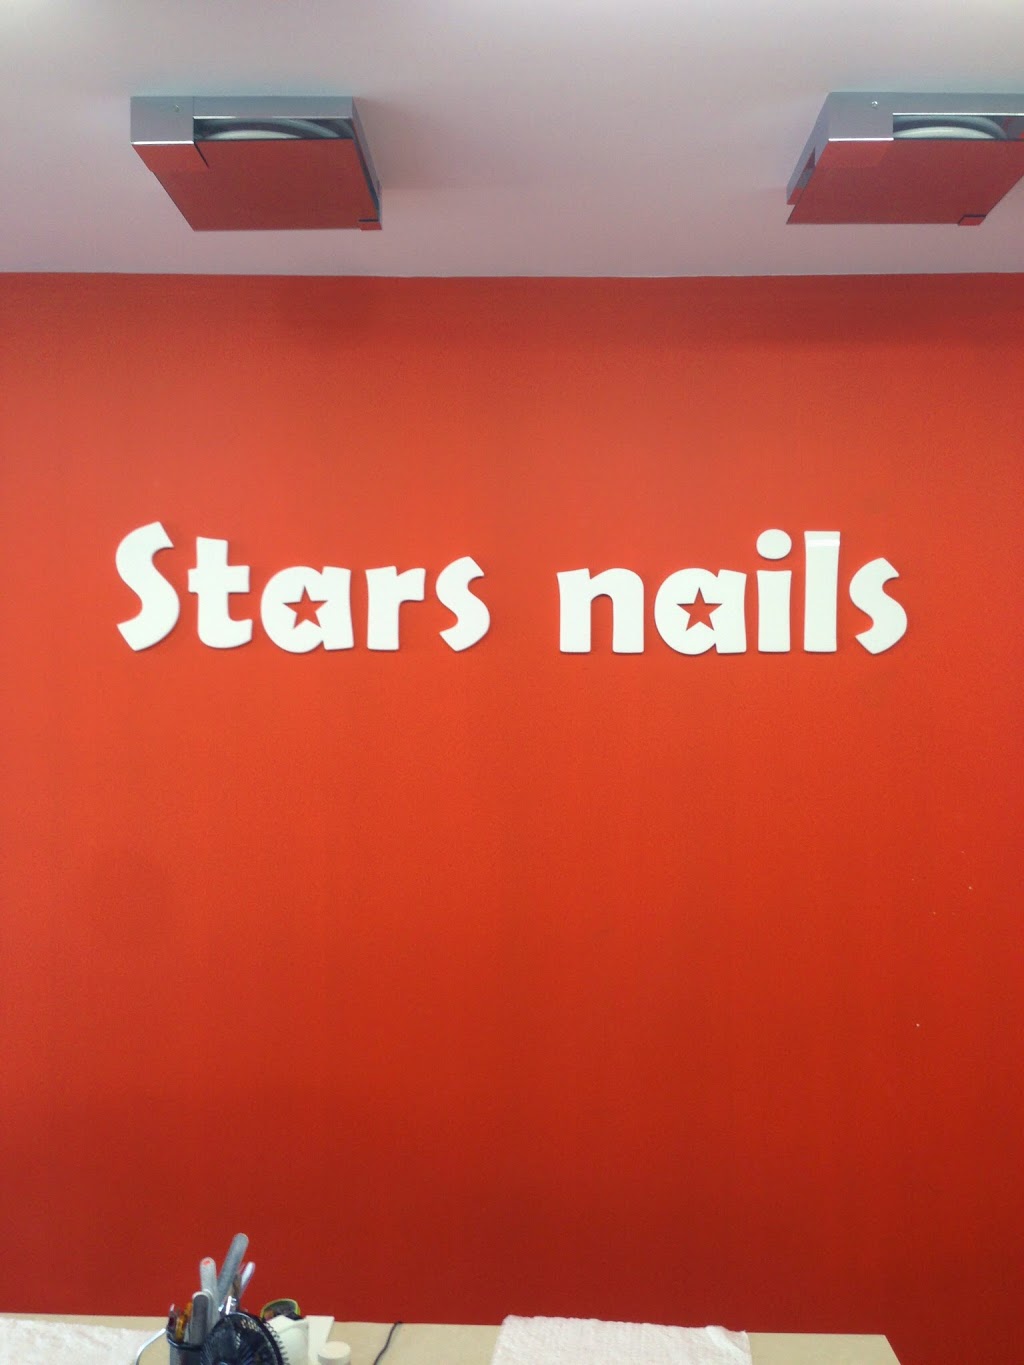 Stars Nails | spa | 736 New South Head Rd, Rose Bay NSW 2029, Australia | 0293711884 OR +61 2 9371 1884